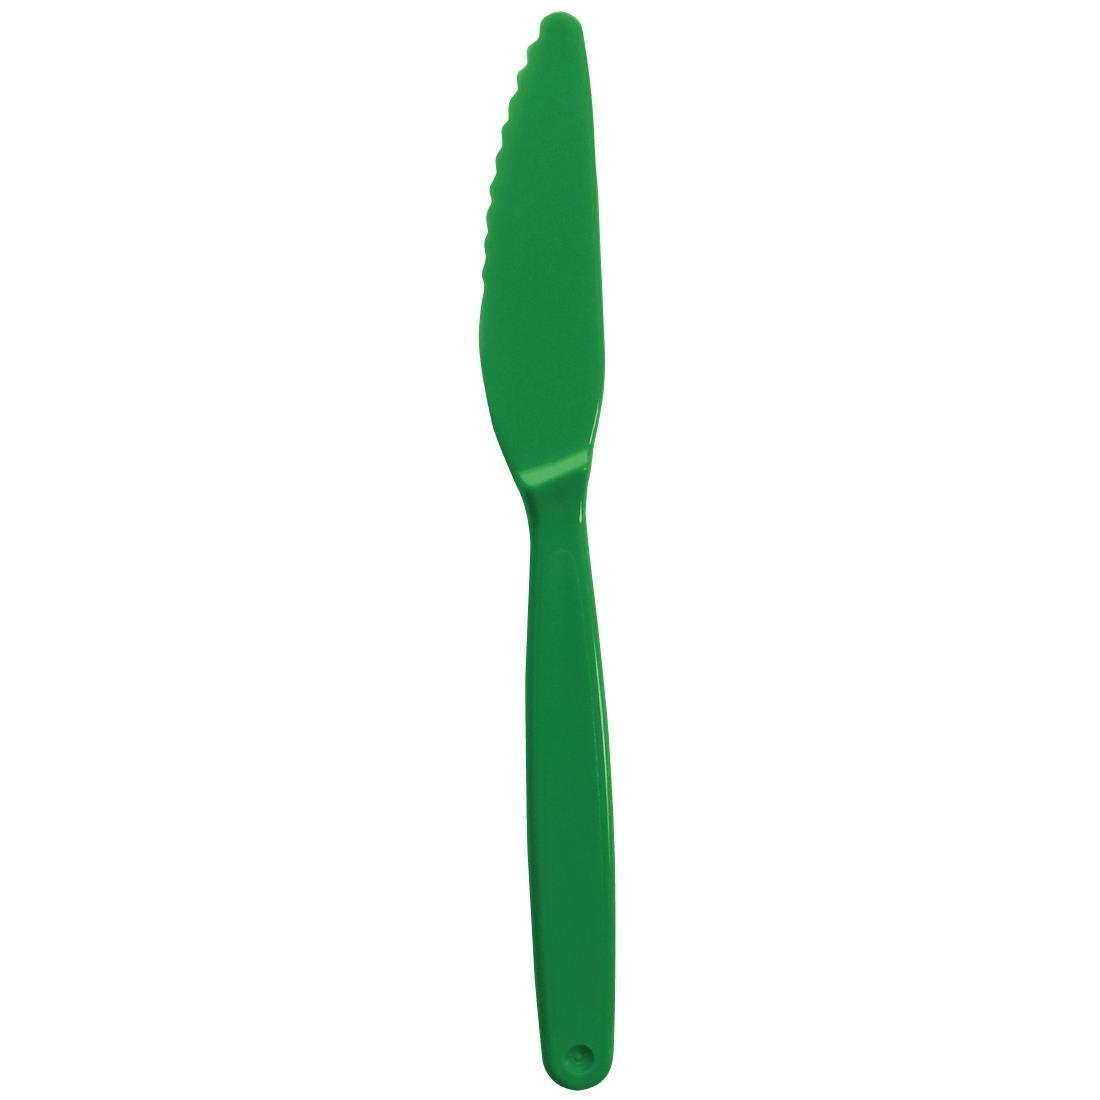 Olympia Kristallon Polycarbonate Knife Green (Pack of 12) - DL116  - 2